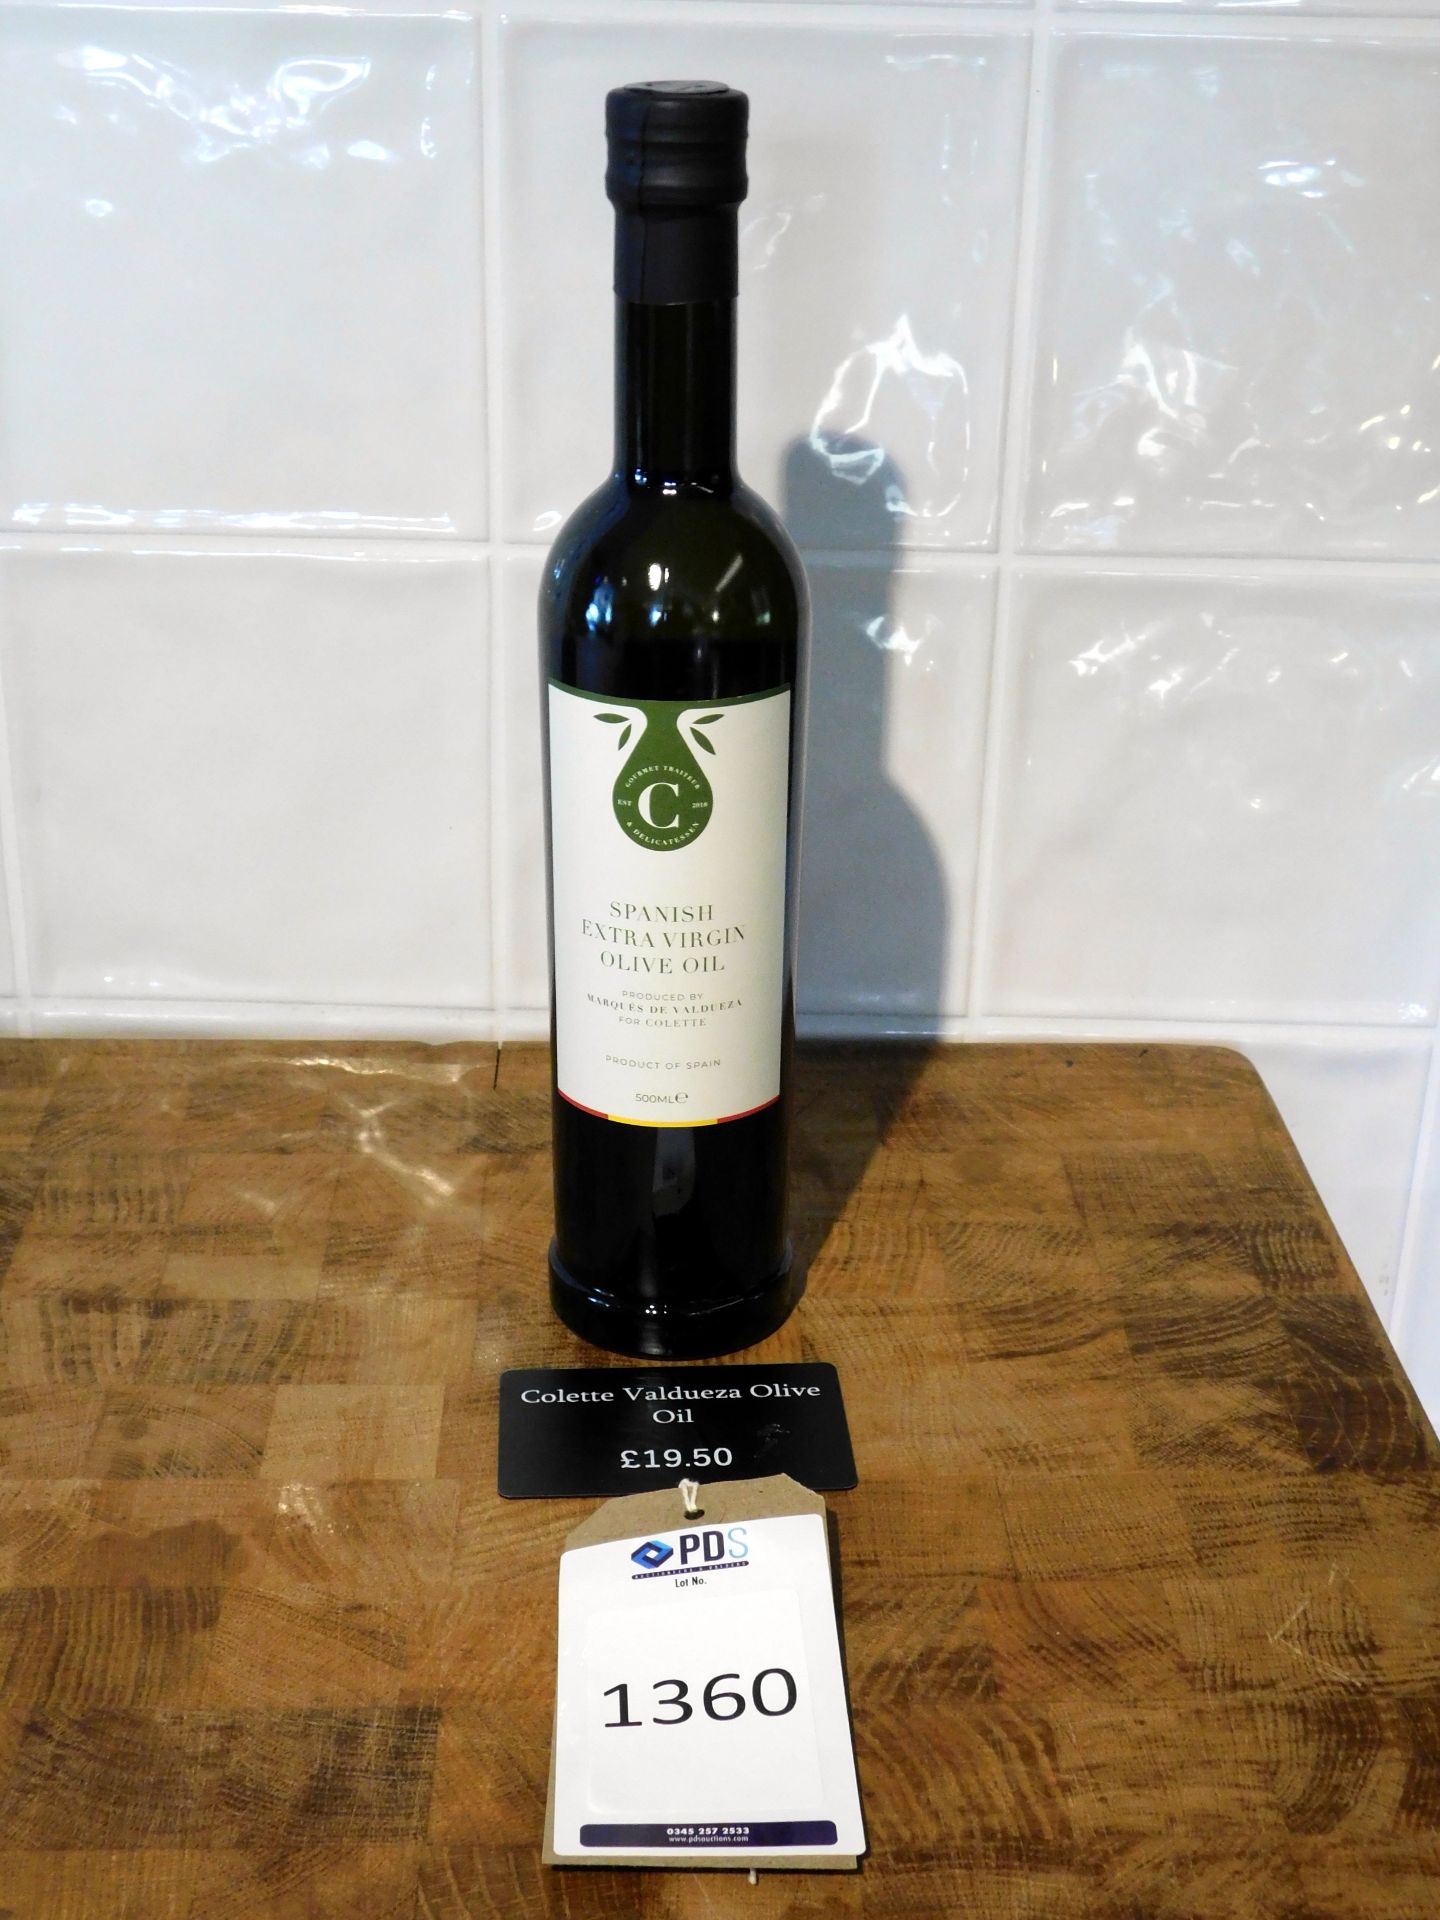 20 Colette Marques de Valdueza Spanish Extra Virgin Olive Oil, 500ml (Location: Brentwood. Please